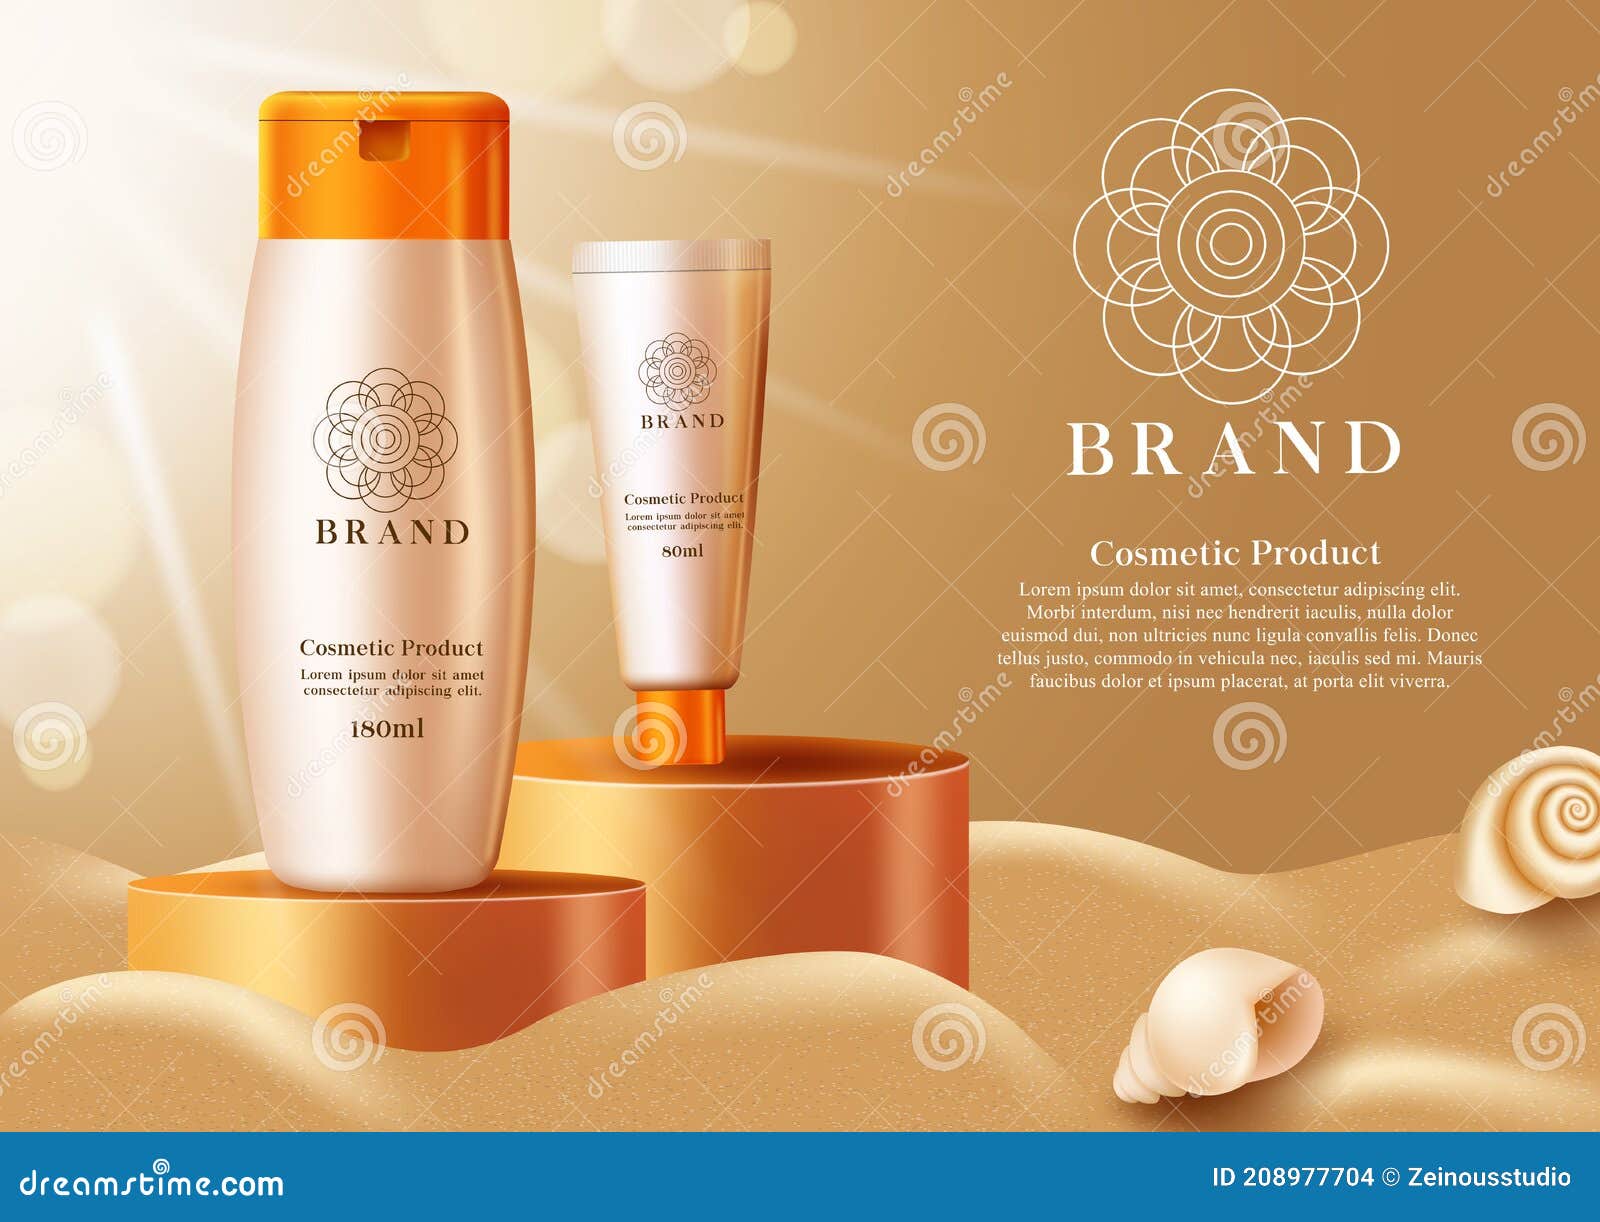 Cosmetic Products Sunscreen Vector Template Design. Cosmetics